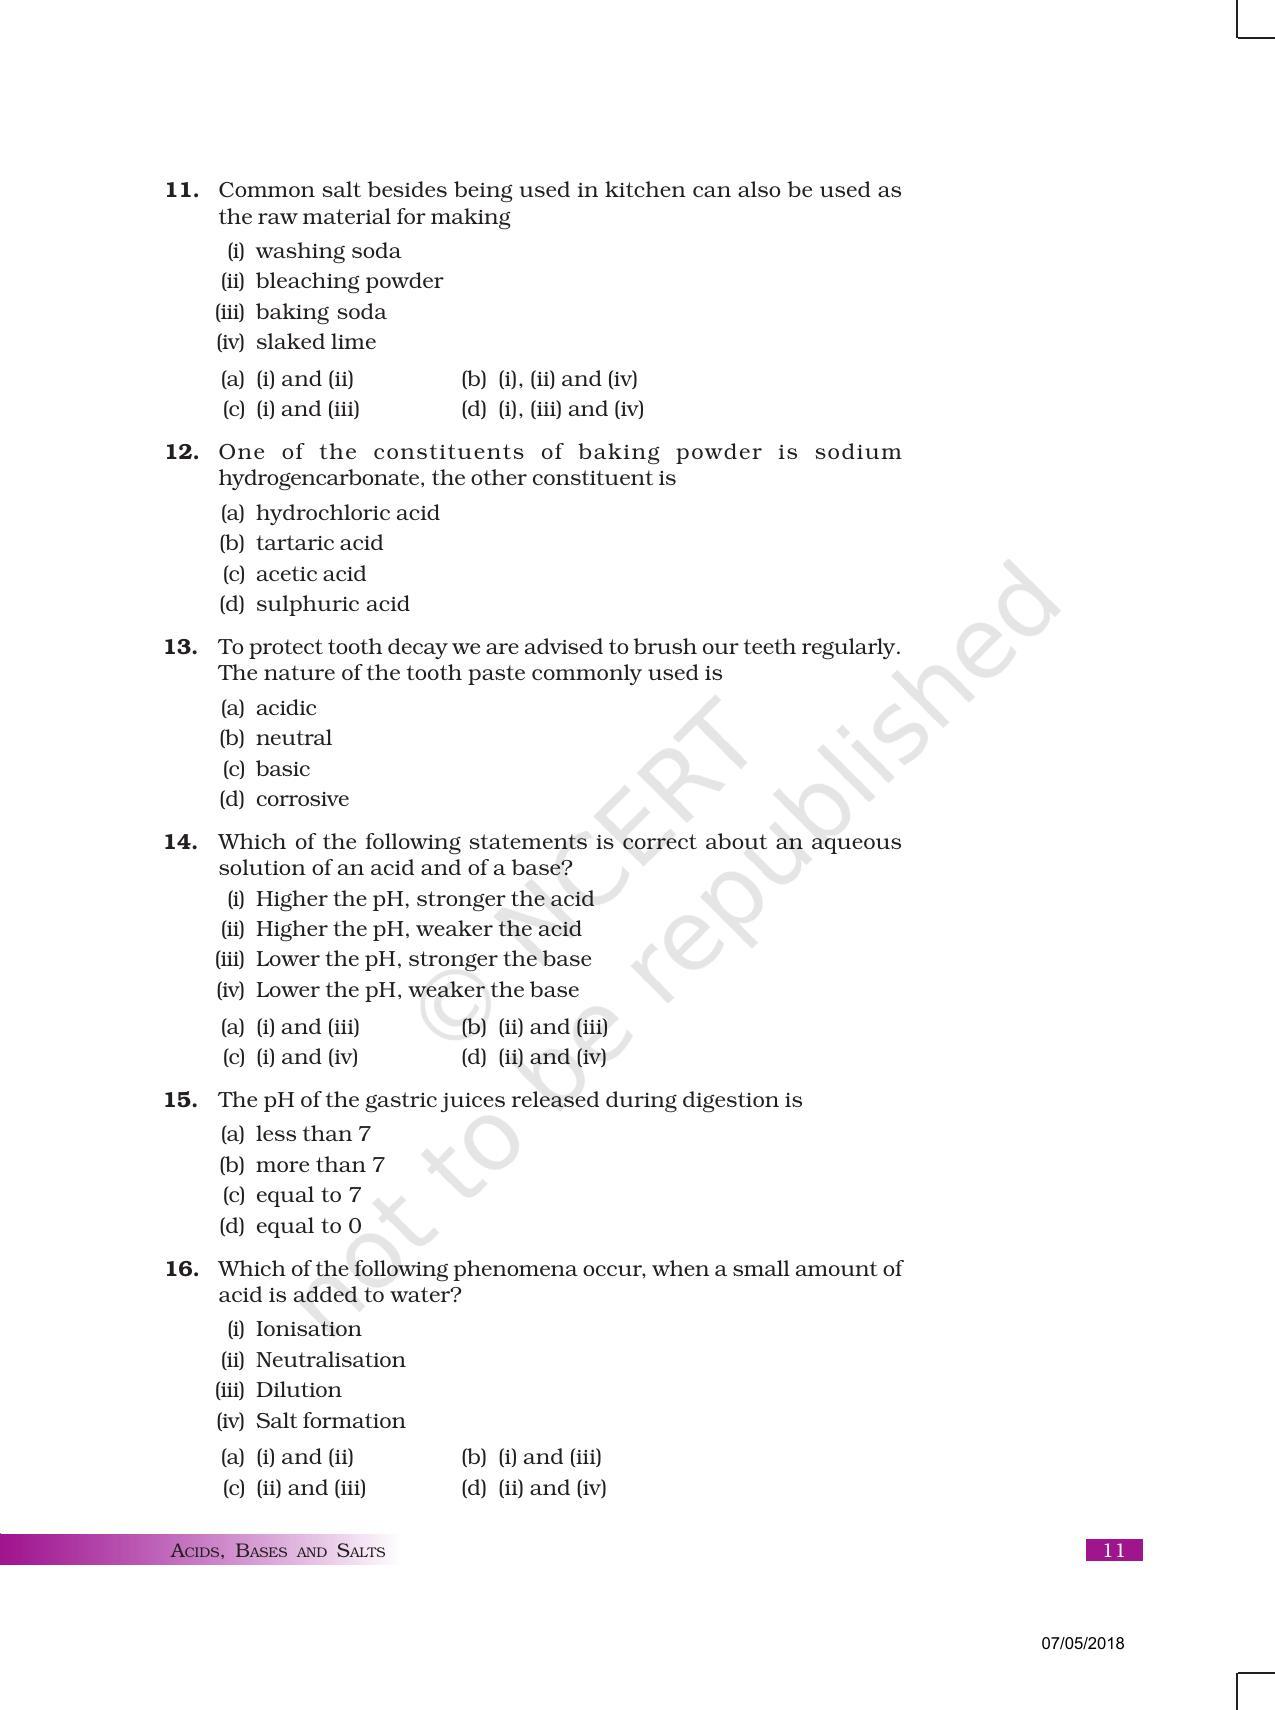 NCERT Exemplar Book for Class 10 Science: Chapter 2 Acids, Bases, and Salts - Page 3